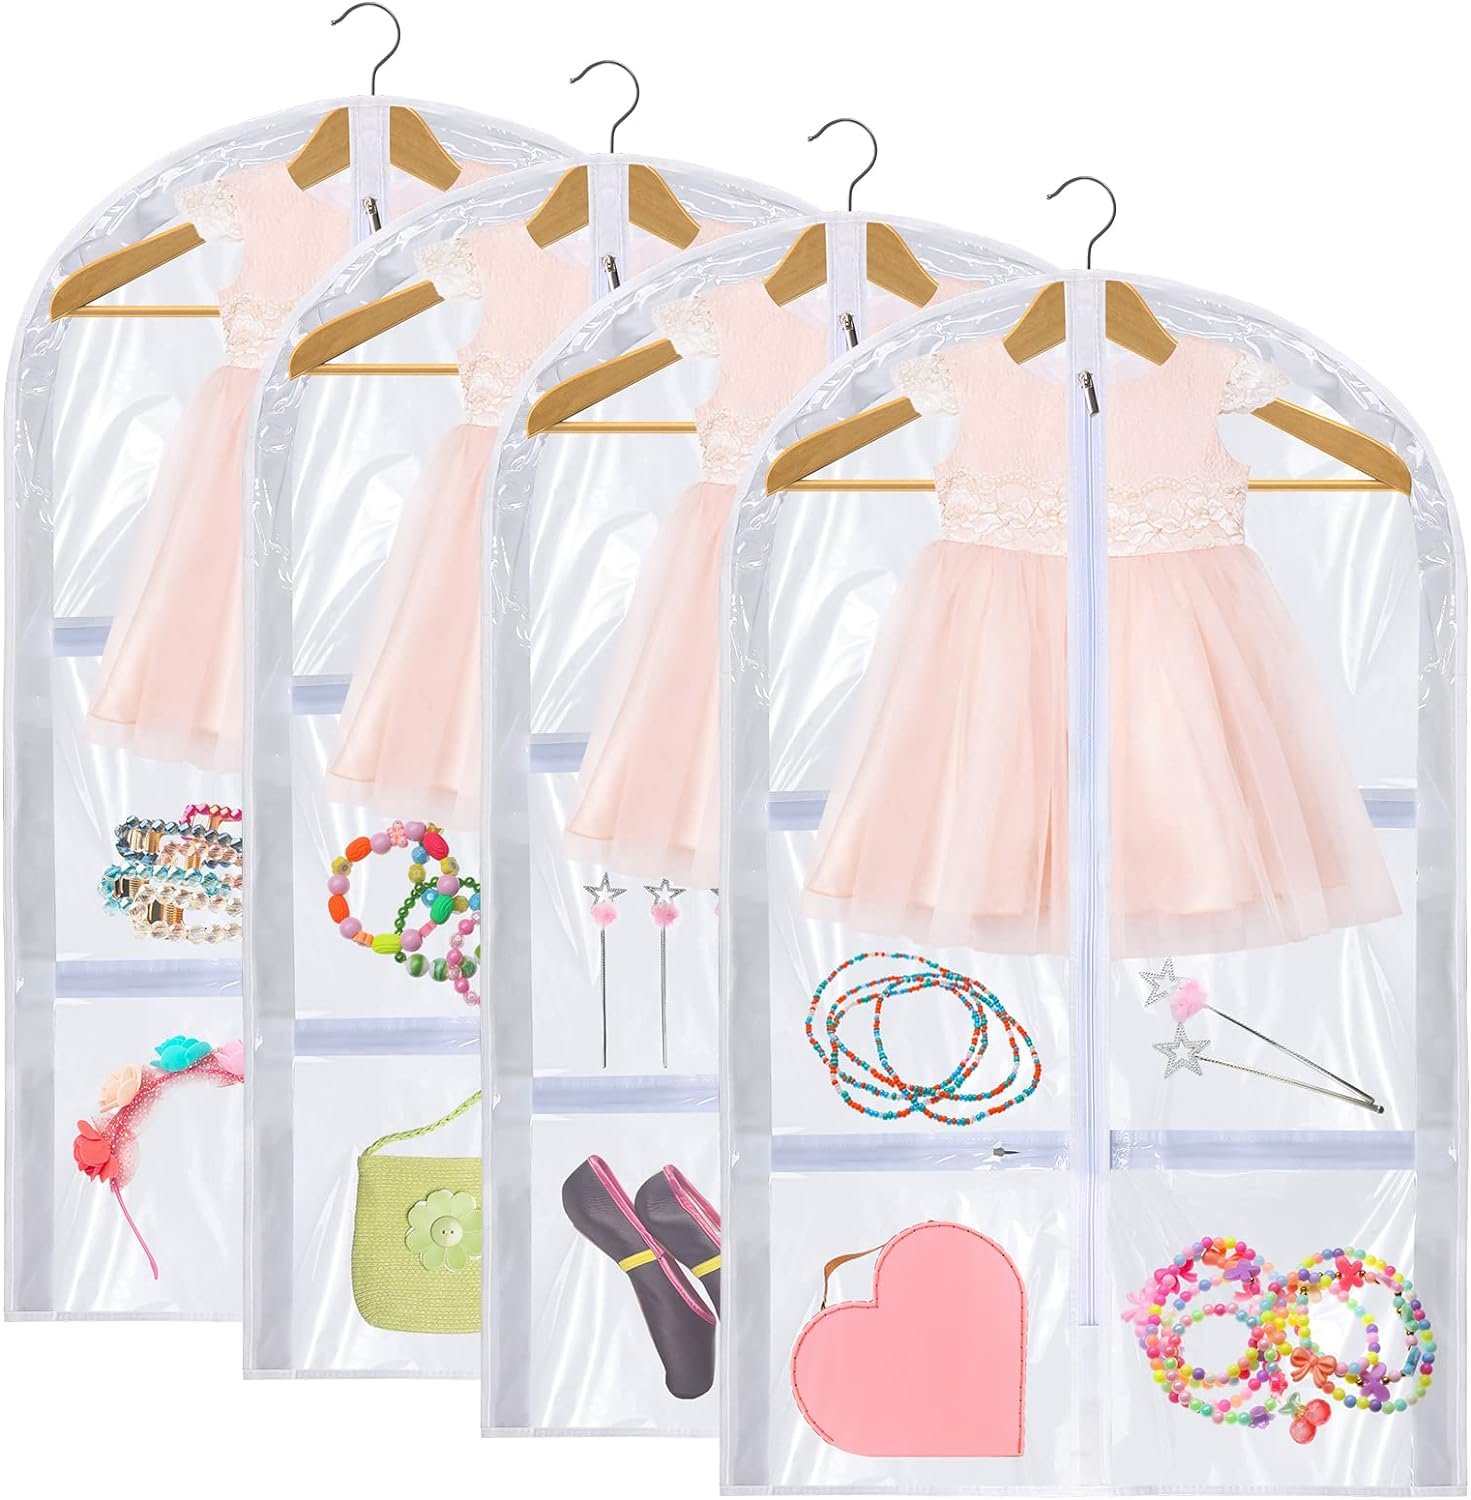 4 Pack Kids Dance Costume Garment Bag, Dance Garment Bags for Dancers, Clear Plastic Clothing bags with Pockets for Children Hanging Clothes Travel Storage